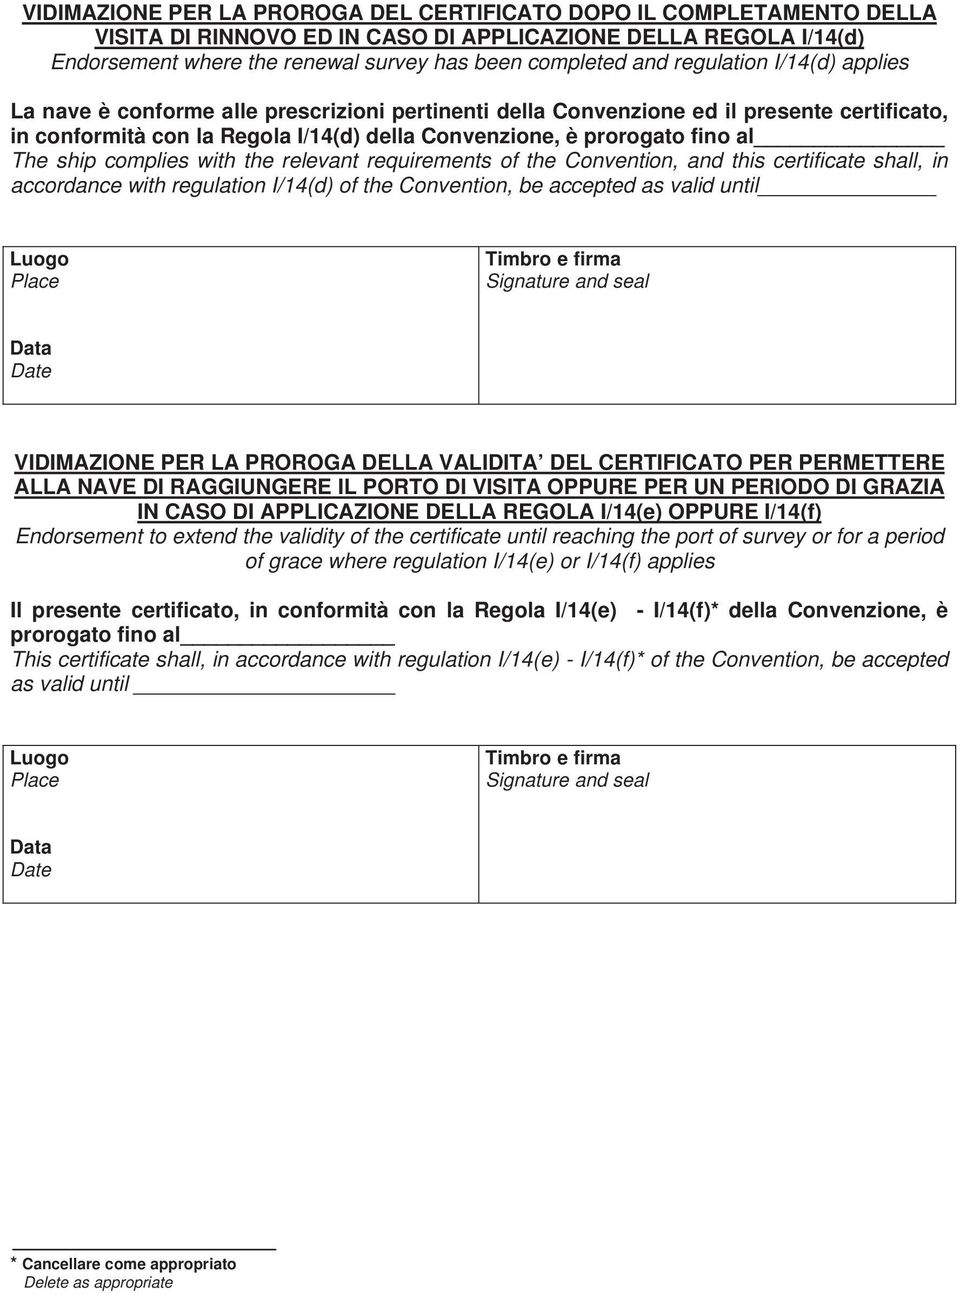 ship complies with the relevant requirements of the Convention, and this certificate shall, in accordance with regulation I/14(d) of the Convention, be accepted as valid until VIDIMAZIONE PER LA